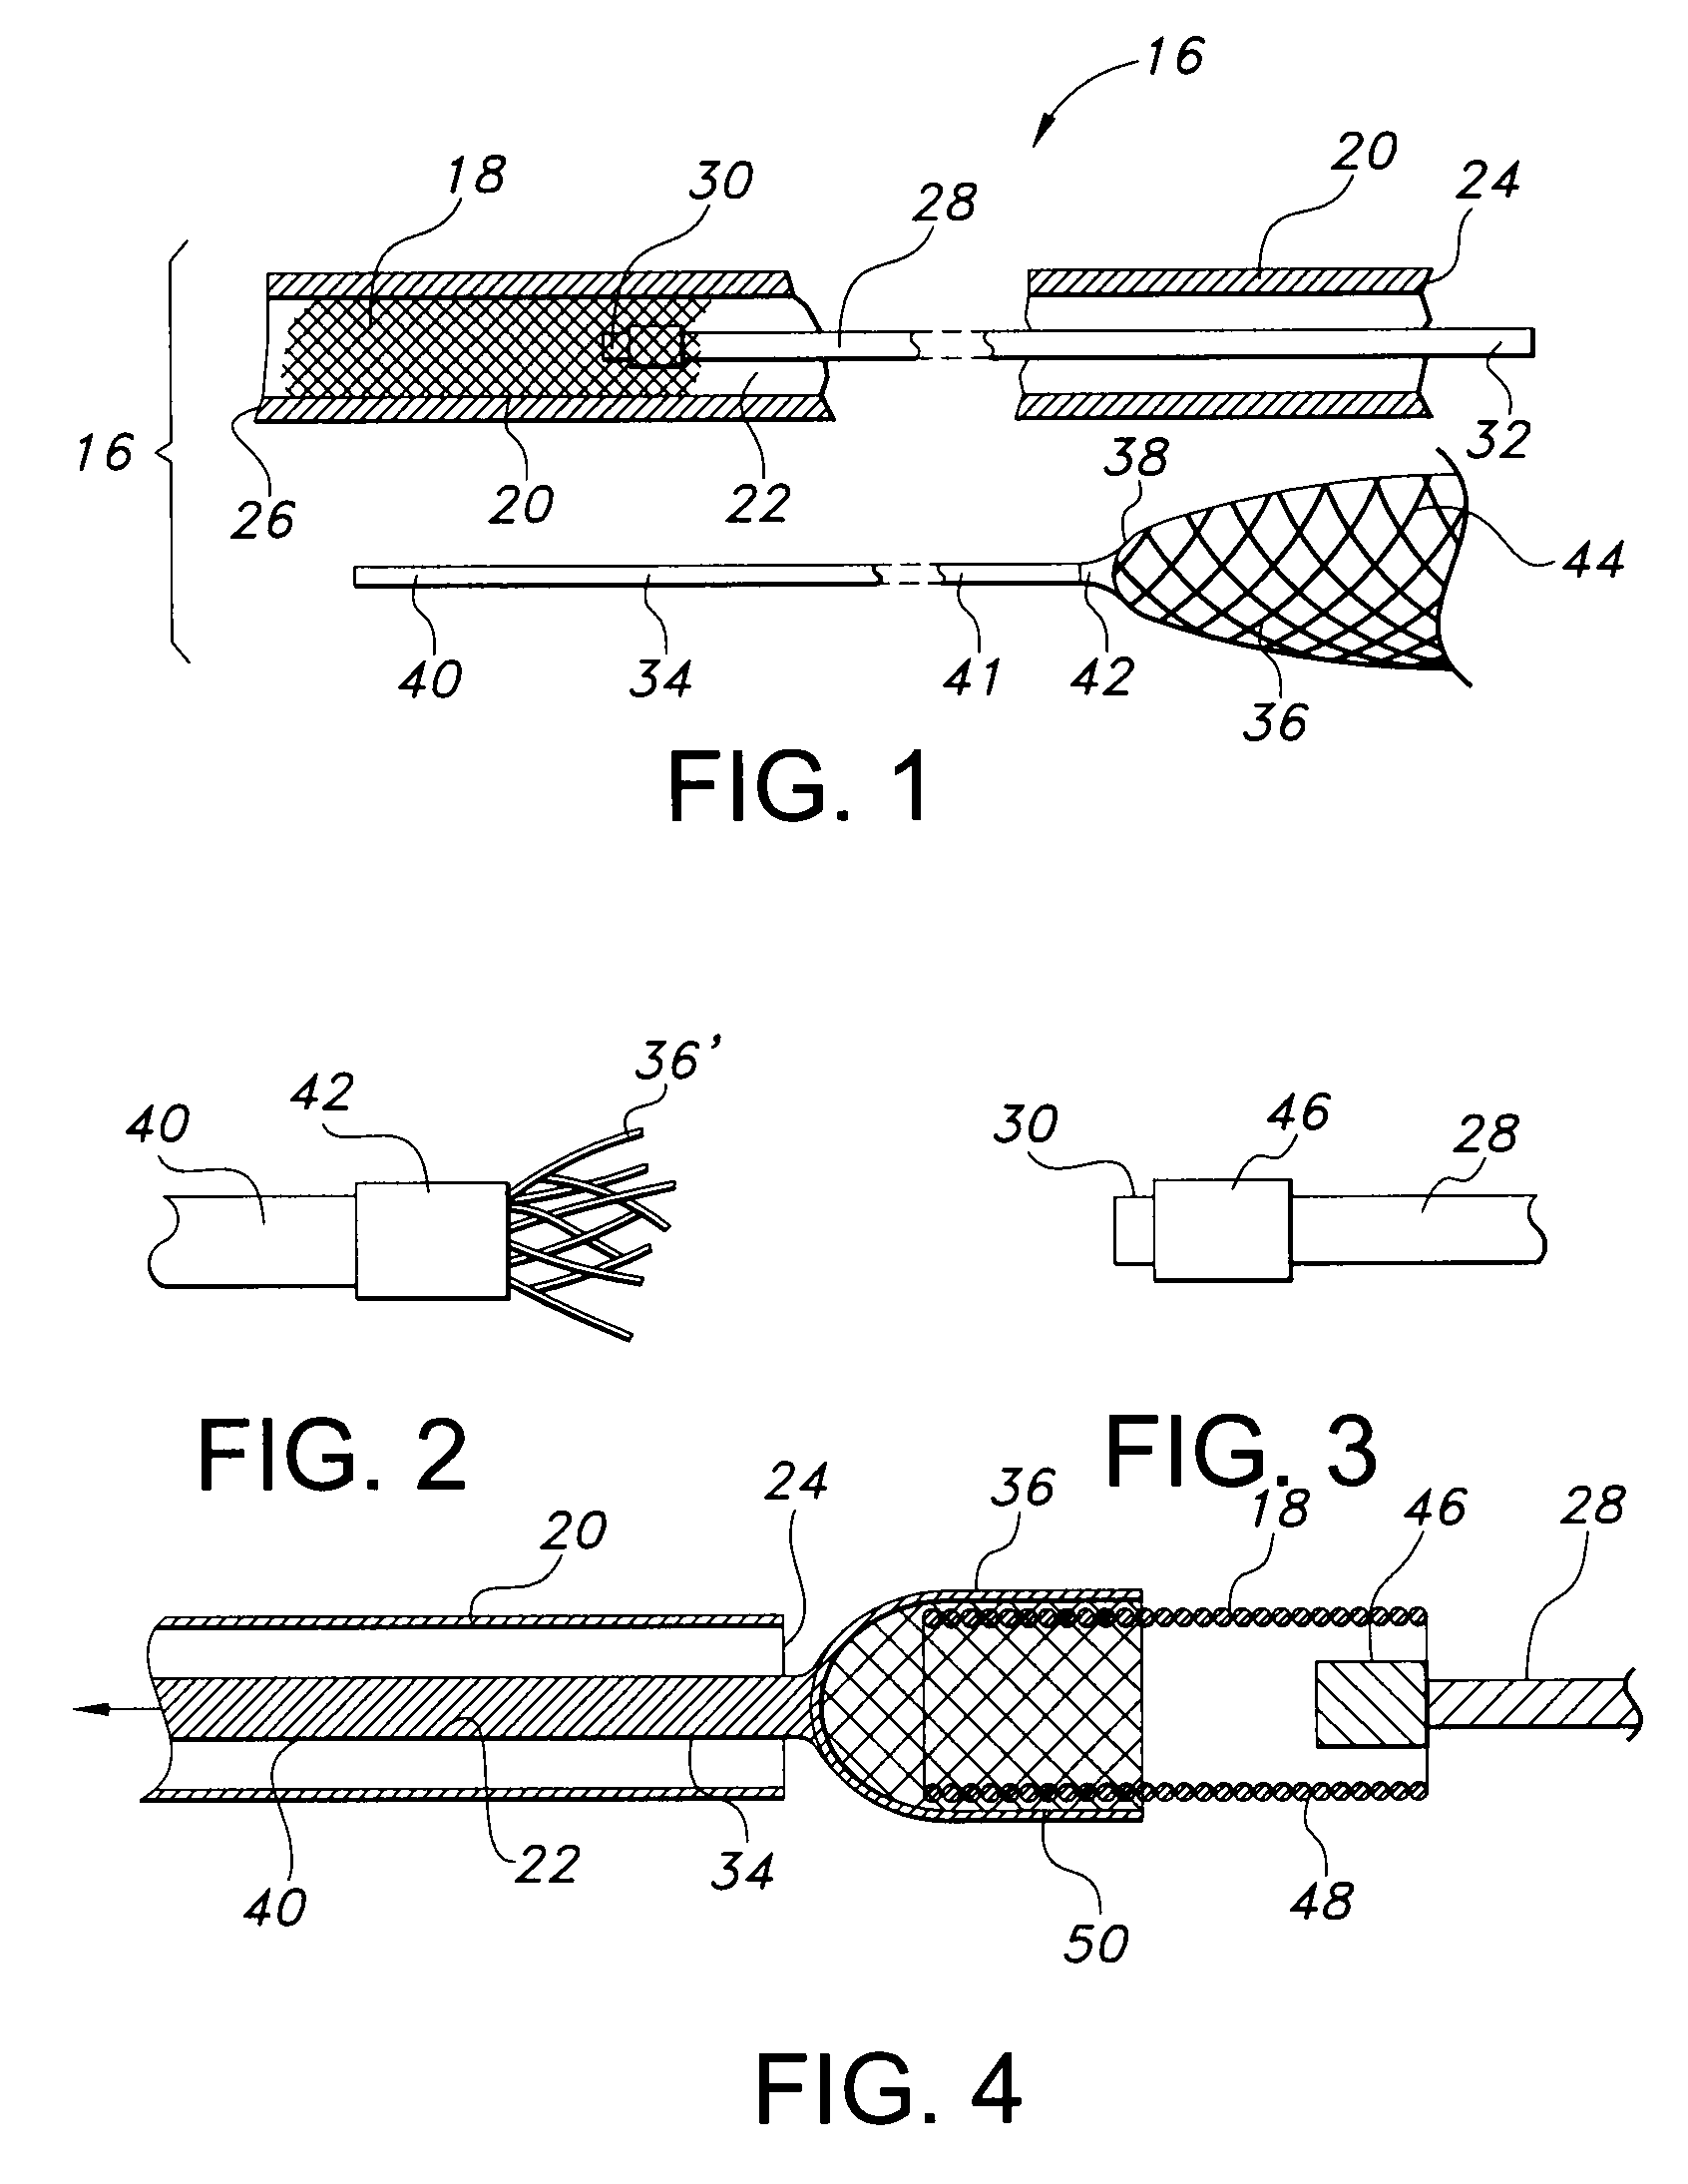 Prosthesis loading delivery and deployment apparatus